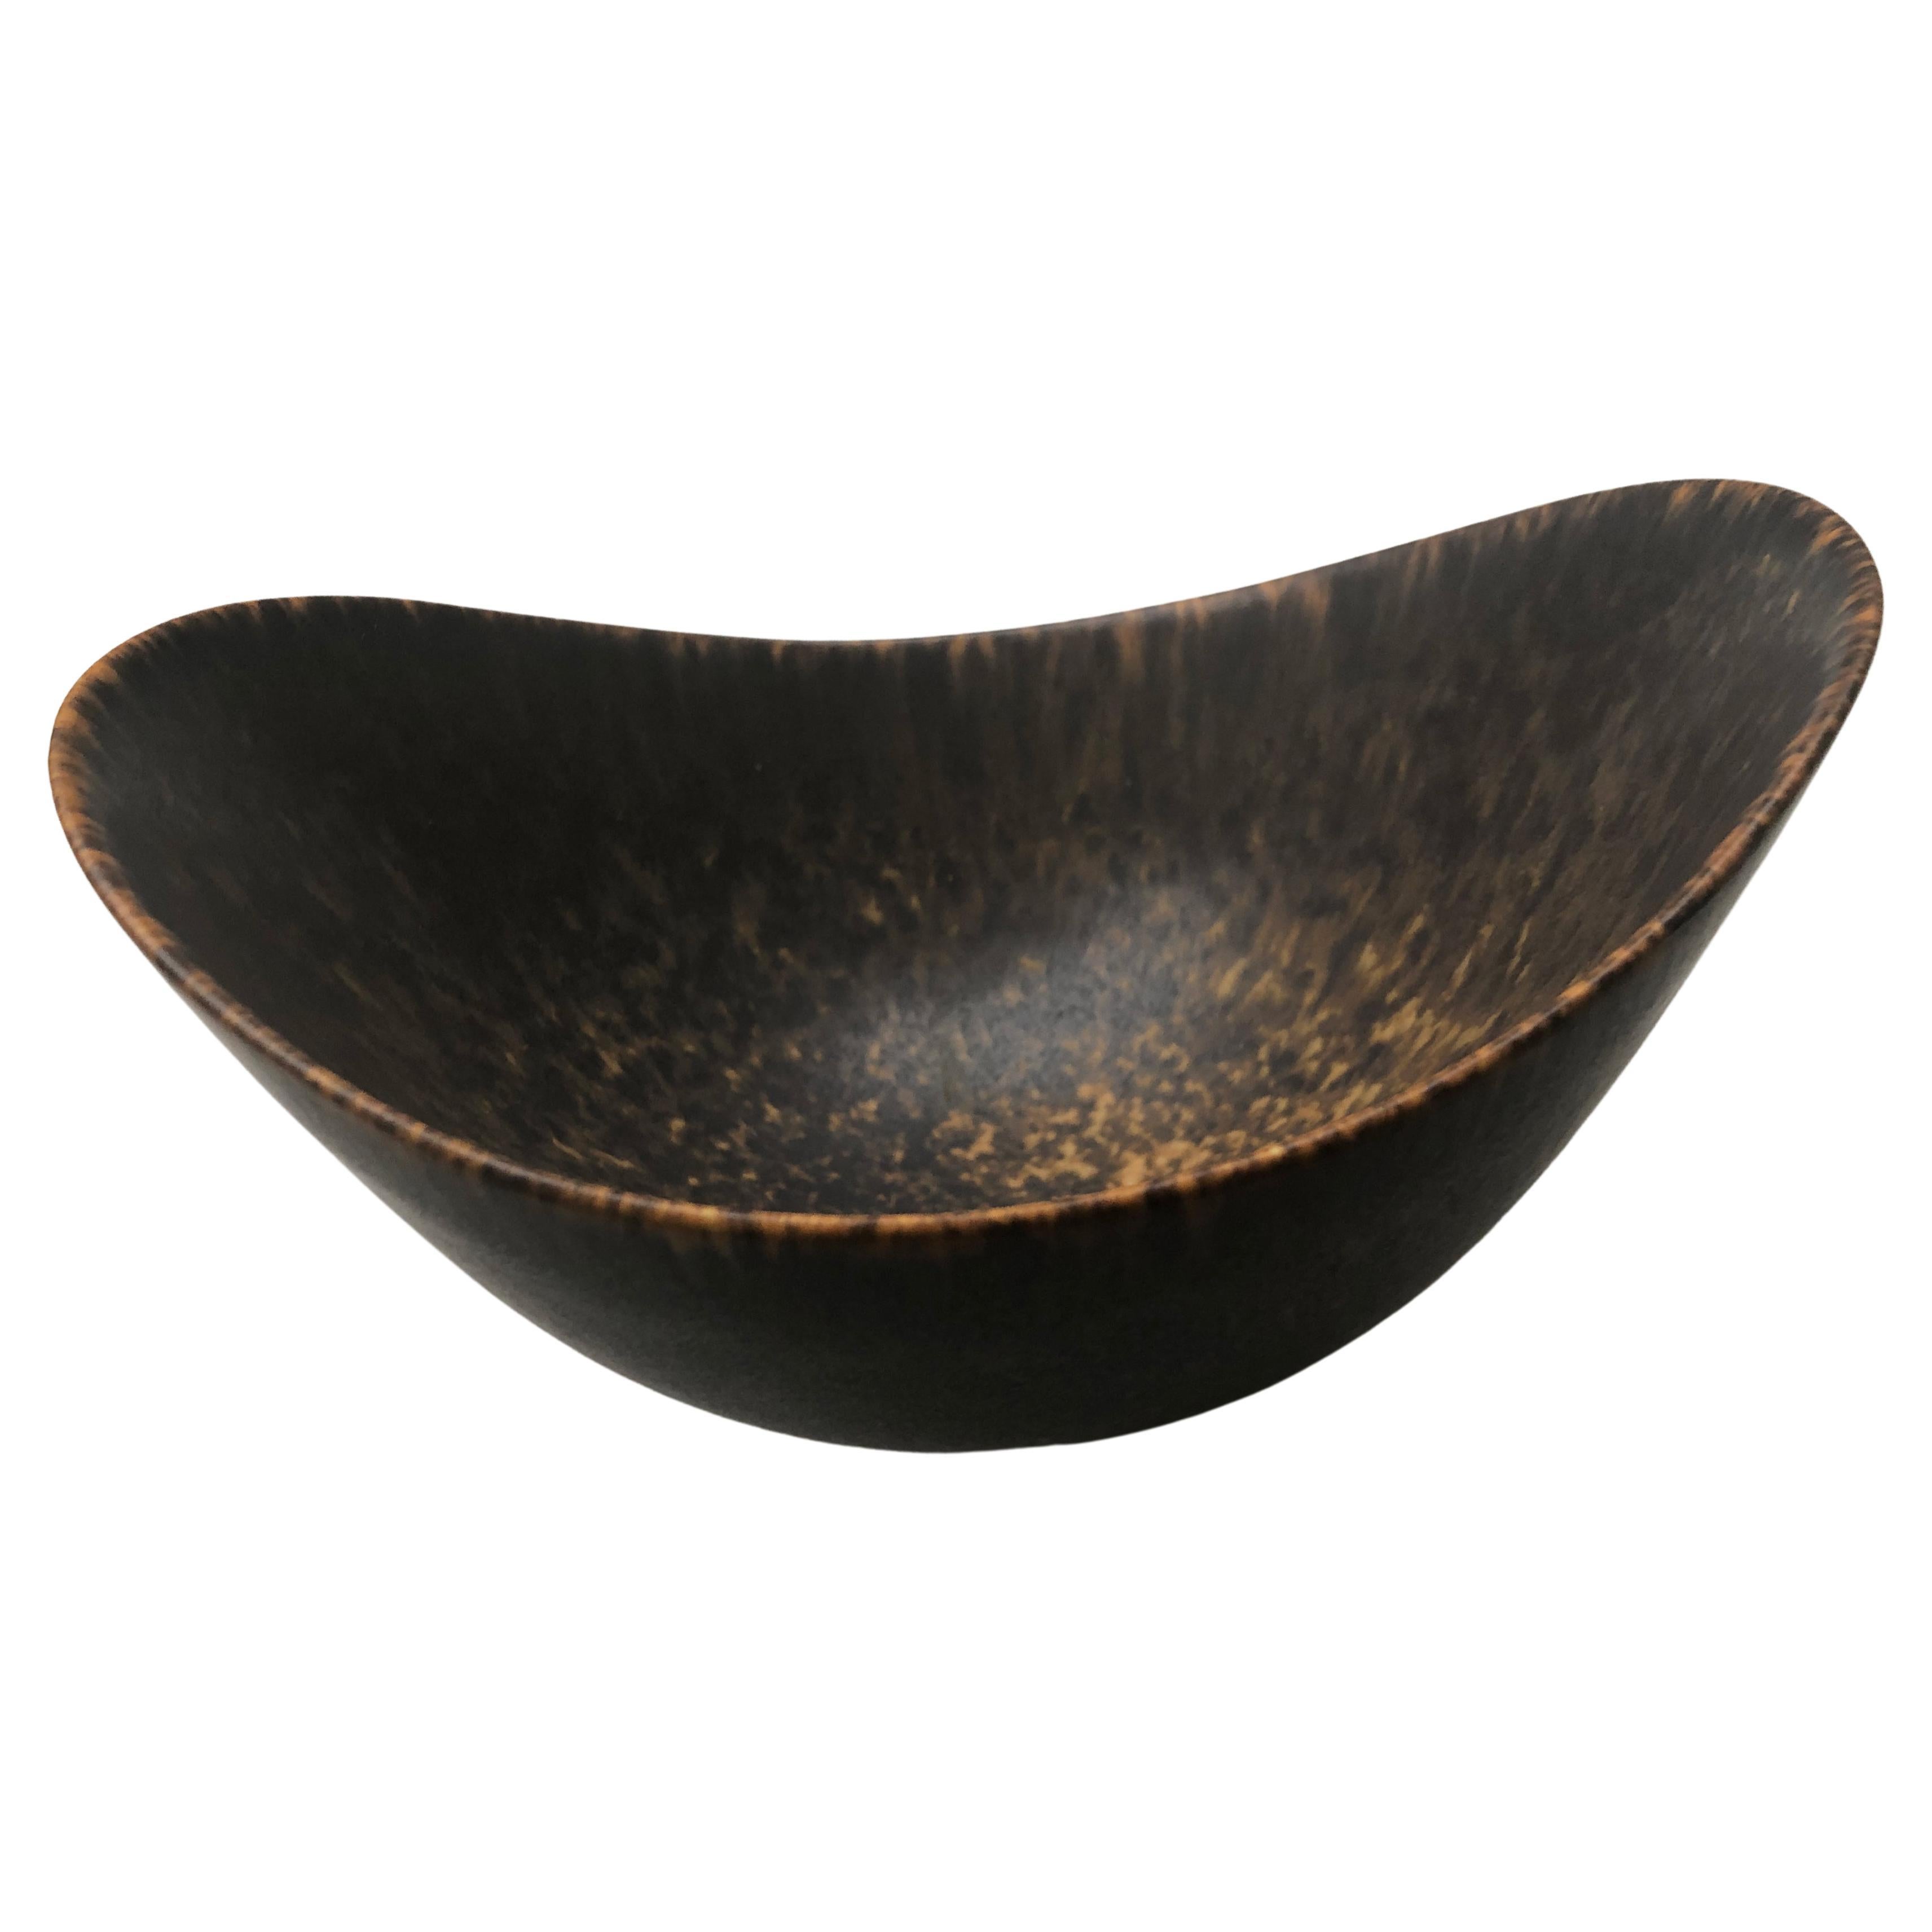 A Classic Brown and Beige-glazed Gunnar Nylund Bowl, Stoneware, Sweden, 1940s For Sale